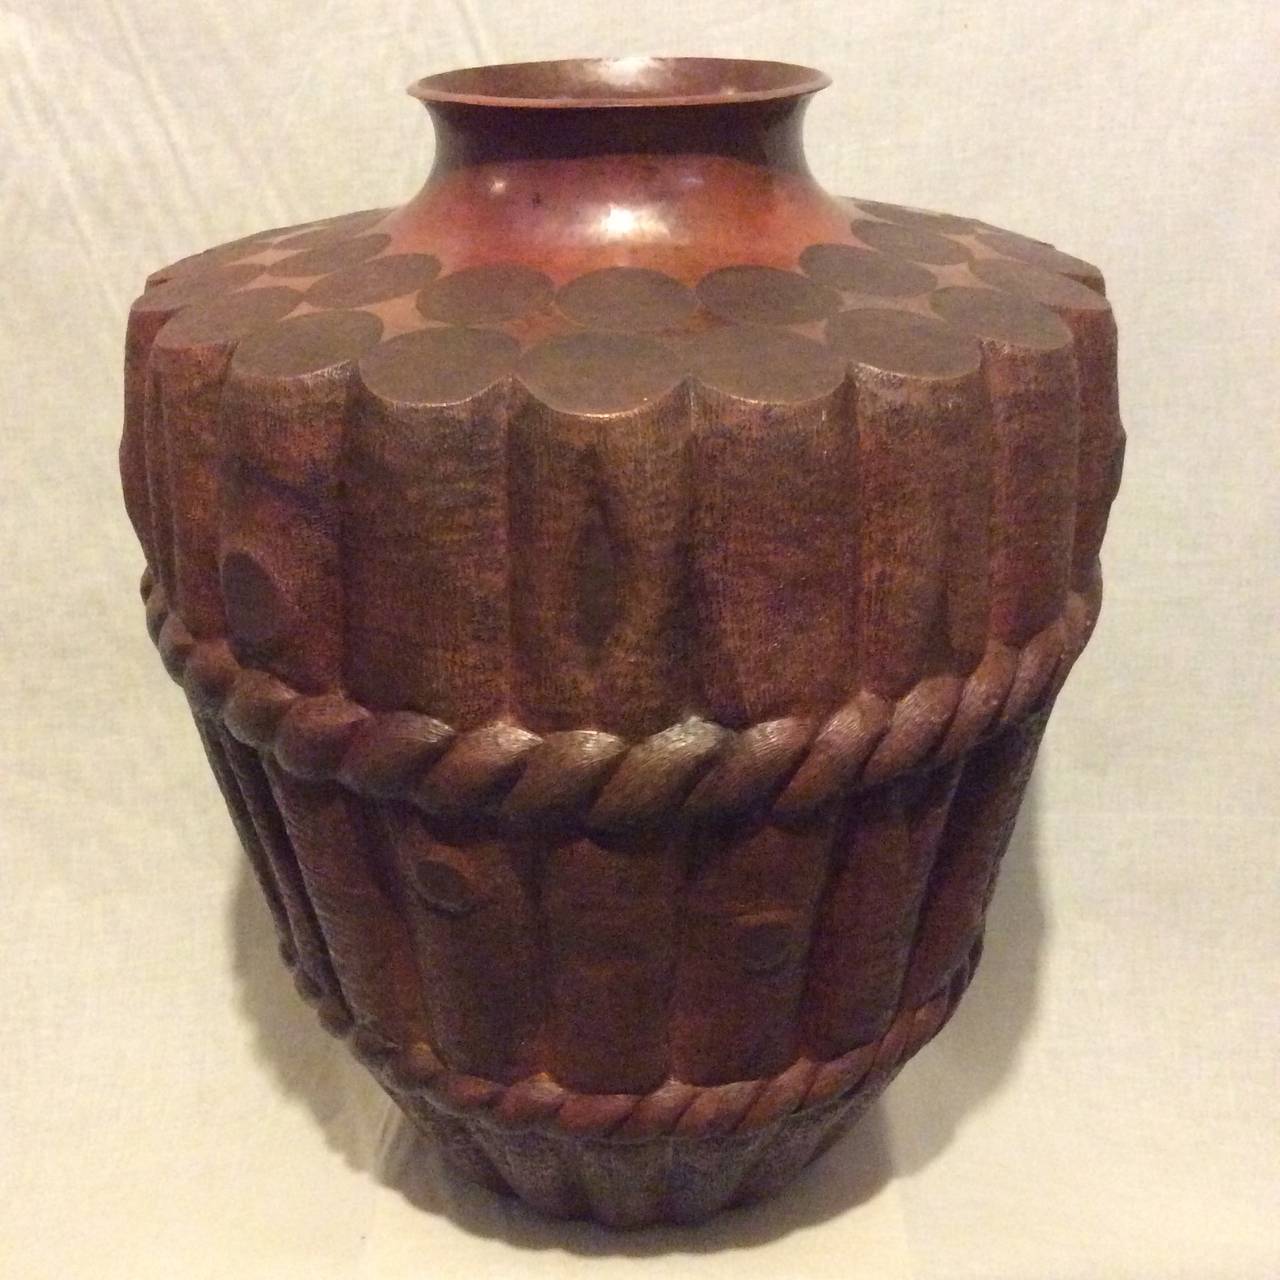 One of a kind!
Copper repousse master work.
This impressively large copper vase brings to life the essence of rustic stylized wood branches bound with undulating rope. It references both Asian and American themes.